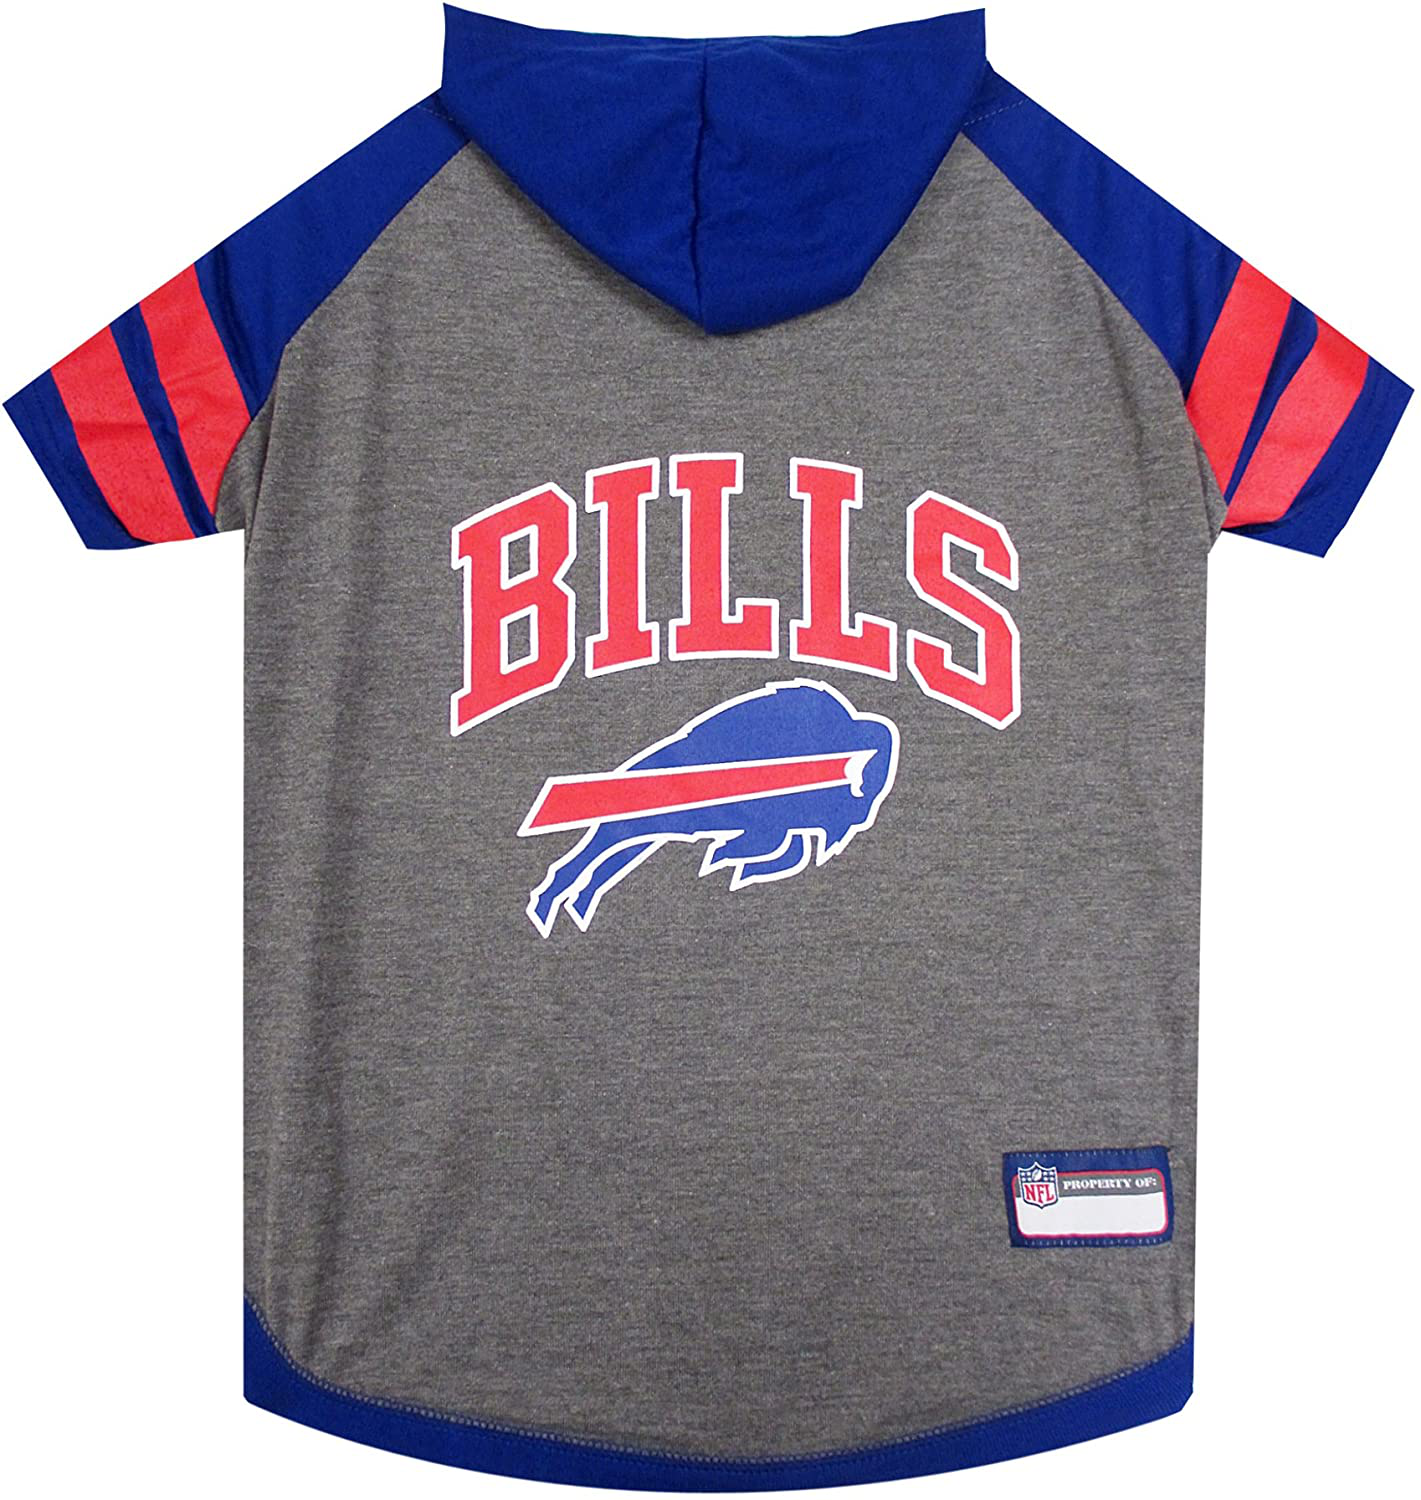 NFL HOODIE TEE for DOGS & CATS. | Football Dog Hoody Tee Shirt Available in All 32 NFL Teams! | Cuttest Sports Hooded Pet Shirt! Available in LARGE, MEDIUM, SMALL & X-SMALL with Your Favorite Team Name! Animals & Pet Supplies > Pet Supplies > Cat Supplies > Cat Apparel Pets First Buffalo Bills XS 